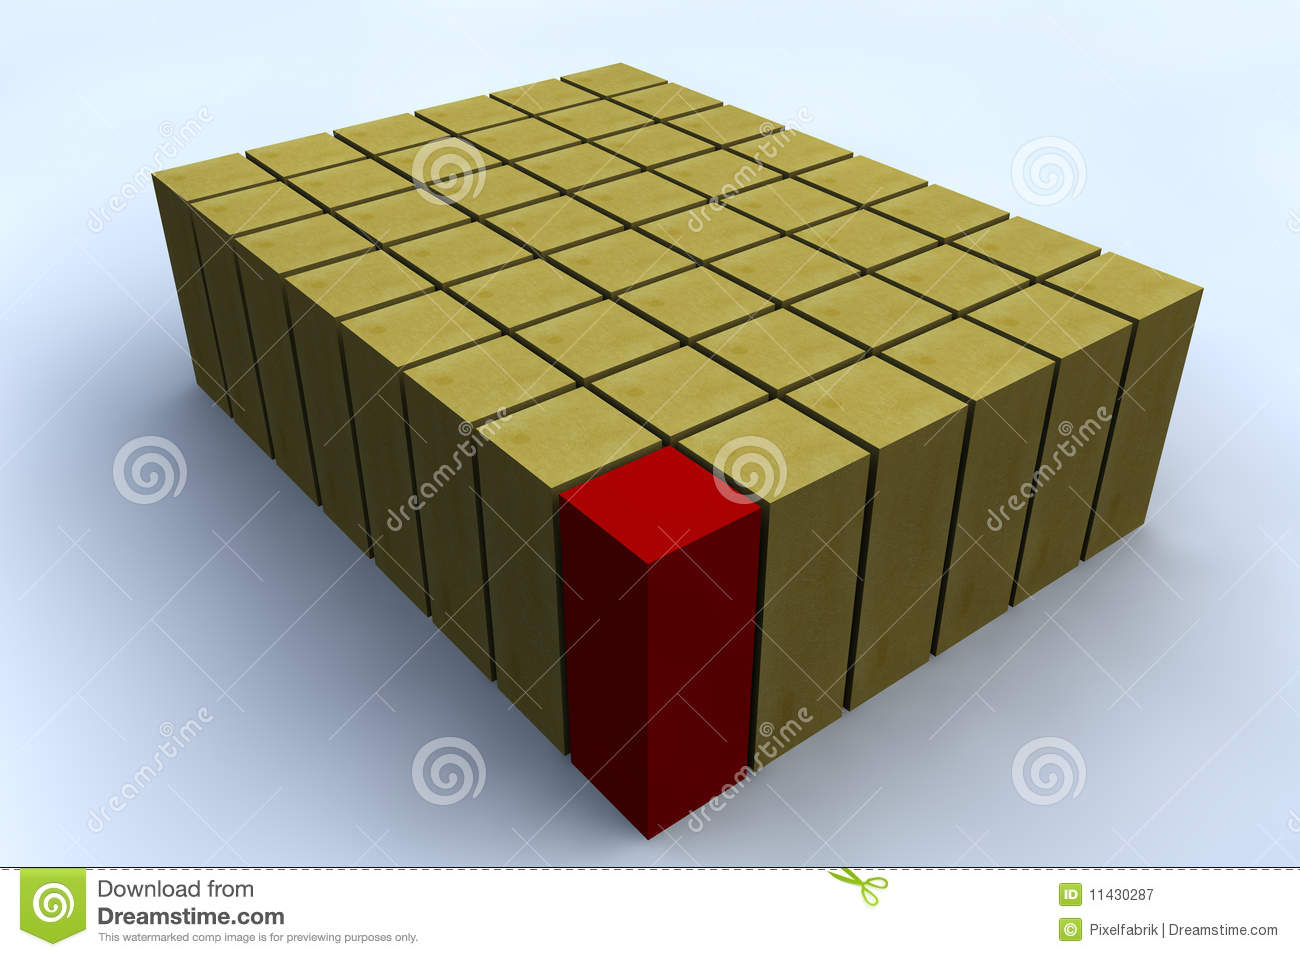 3d Rectangle Royalty Free Stock Photography   Image  11430287